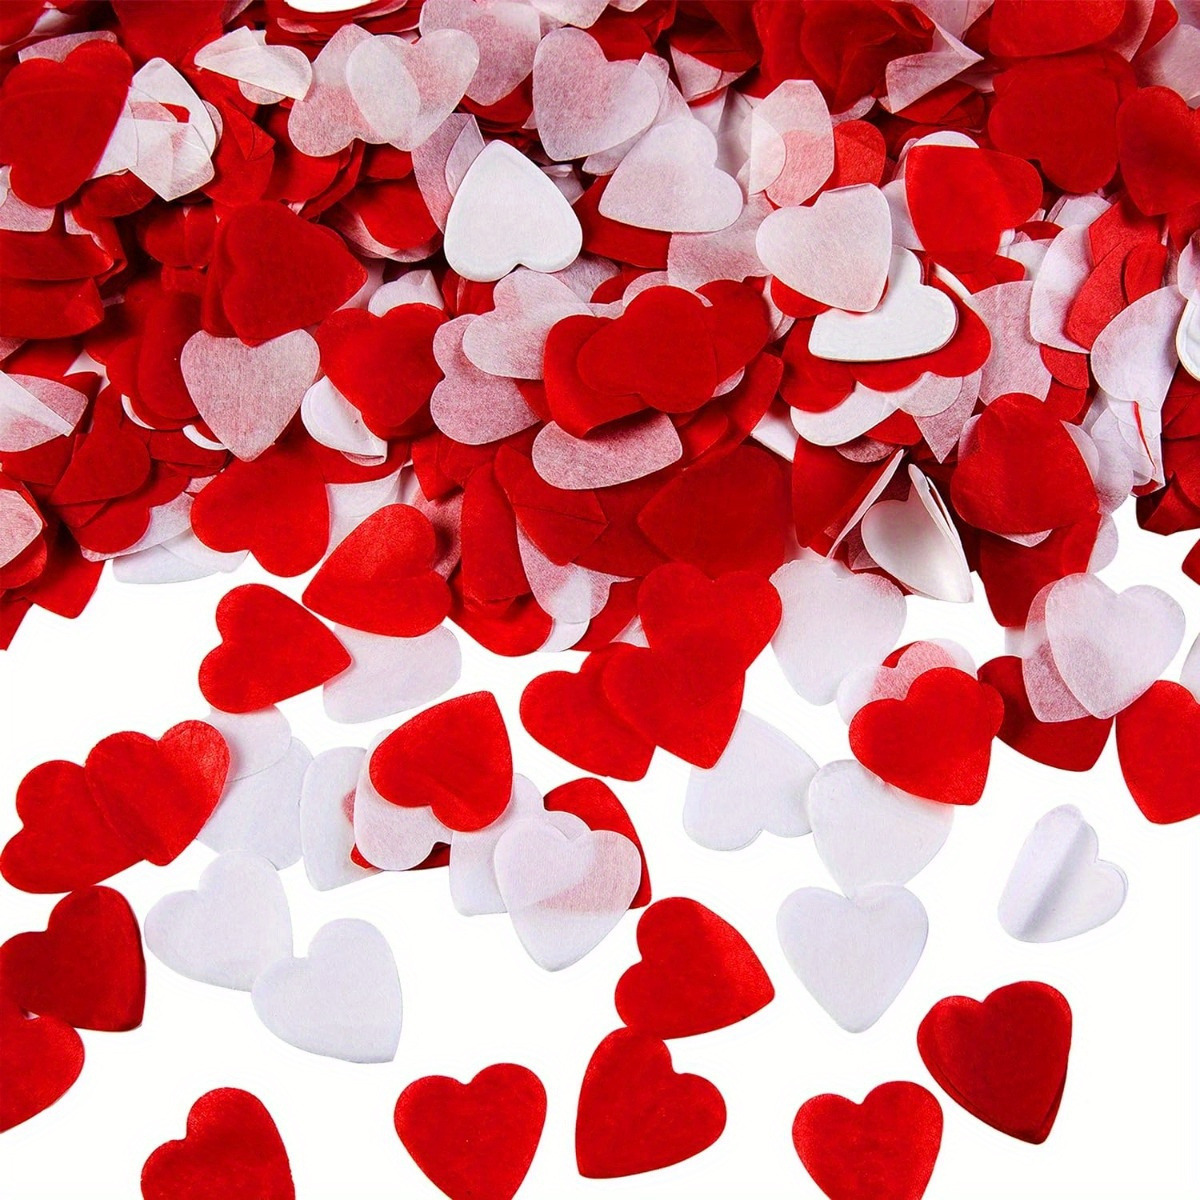 

1000pcs, Tissue Paper White And Red Heart Confetti For Birthday Anniversary Wedding Mother's Day Decorations - Love Heart Sprinkles For Romantic Table Decorations